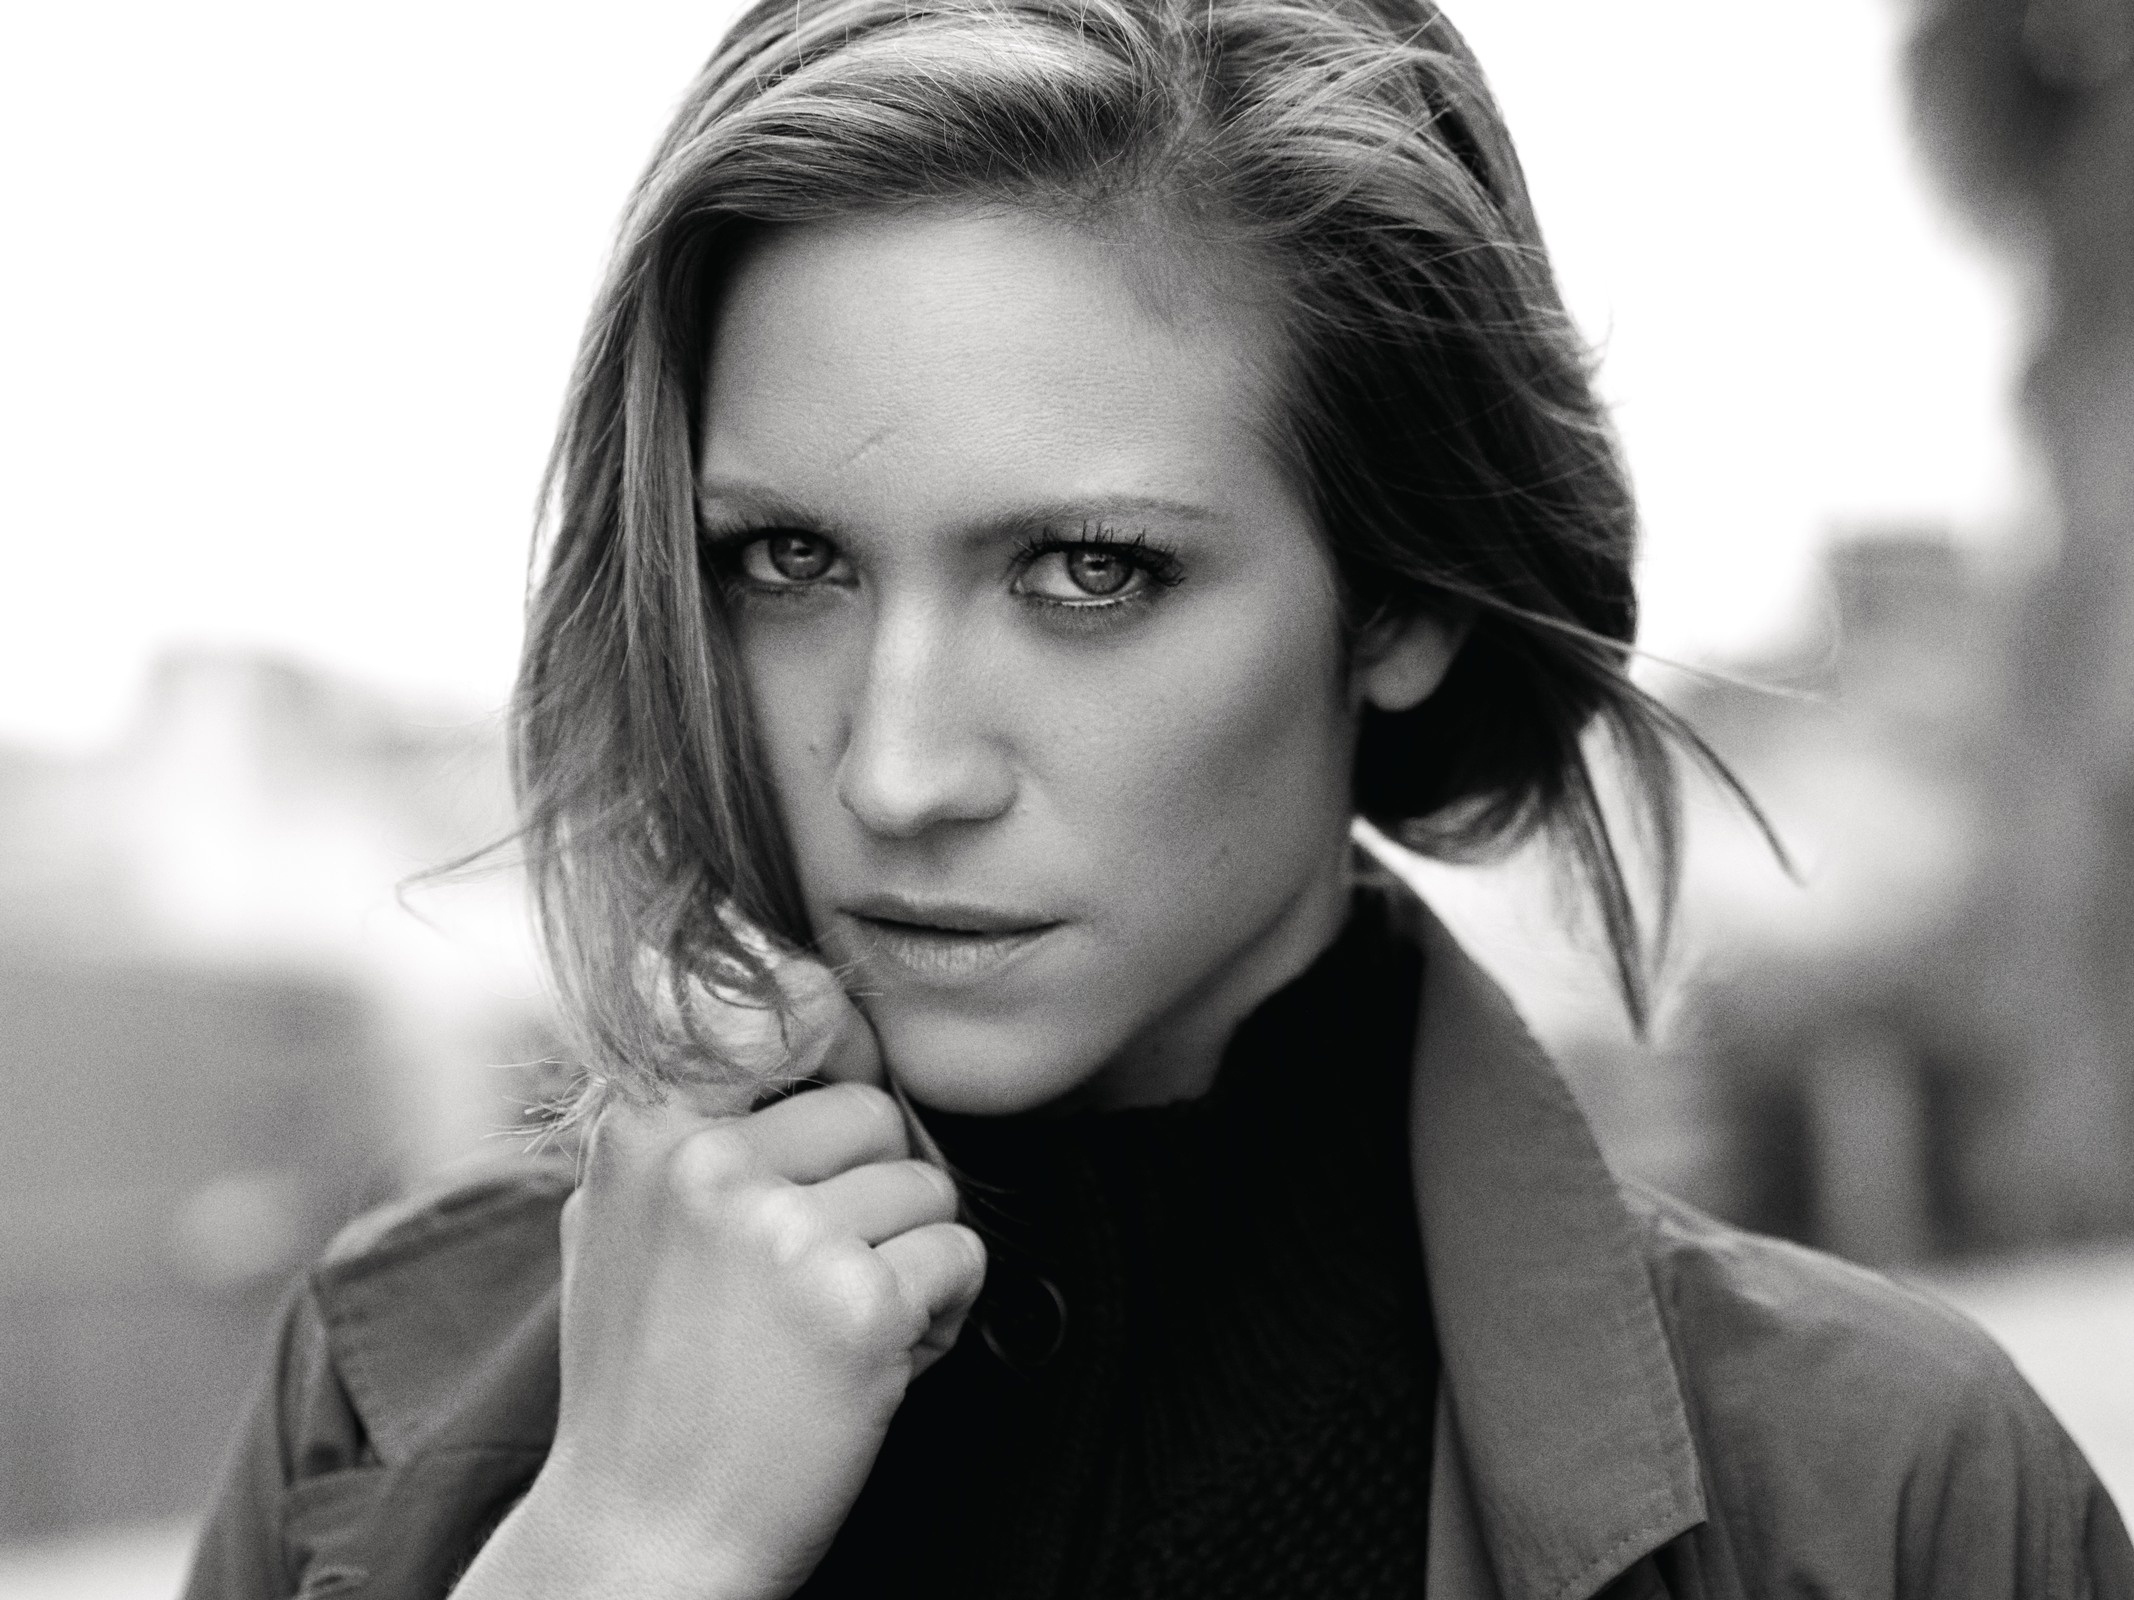 Brittany Snow Wallpaper 2 by ResolutionDesigns on DeviantArt